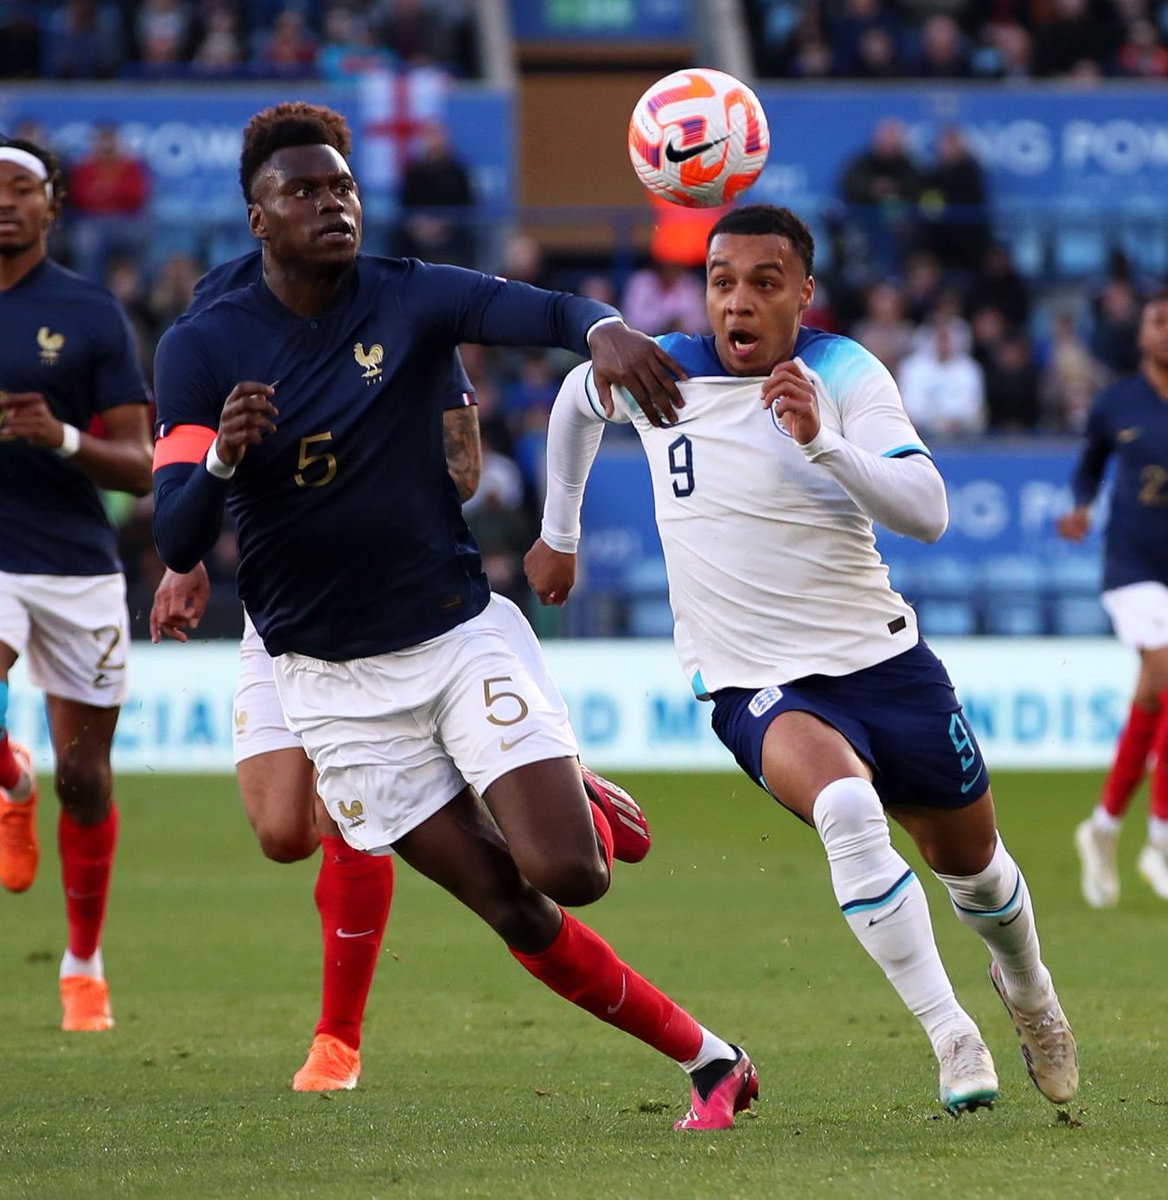 🇫🇷 Benoit Badiashile was 100% on his aerial duel battles (2/2), ground duel battles (2/2), successful tackles (2/2) for France against England. Benoit also was the most accurate passer (96%) and completed more long balls (8/9) in the game. 

#CFC #ENGFRA